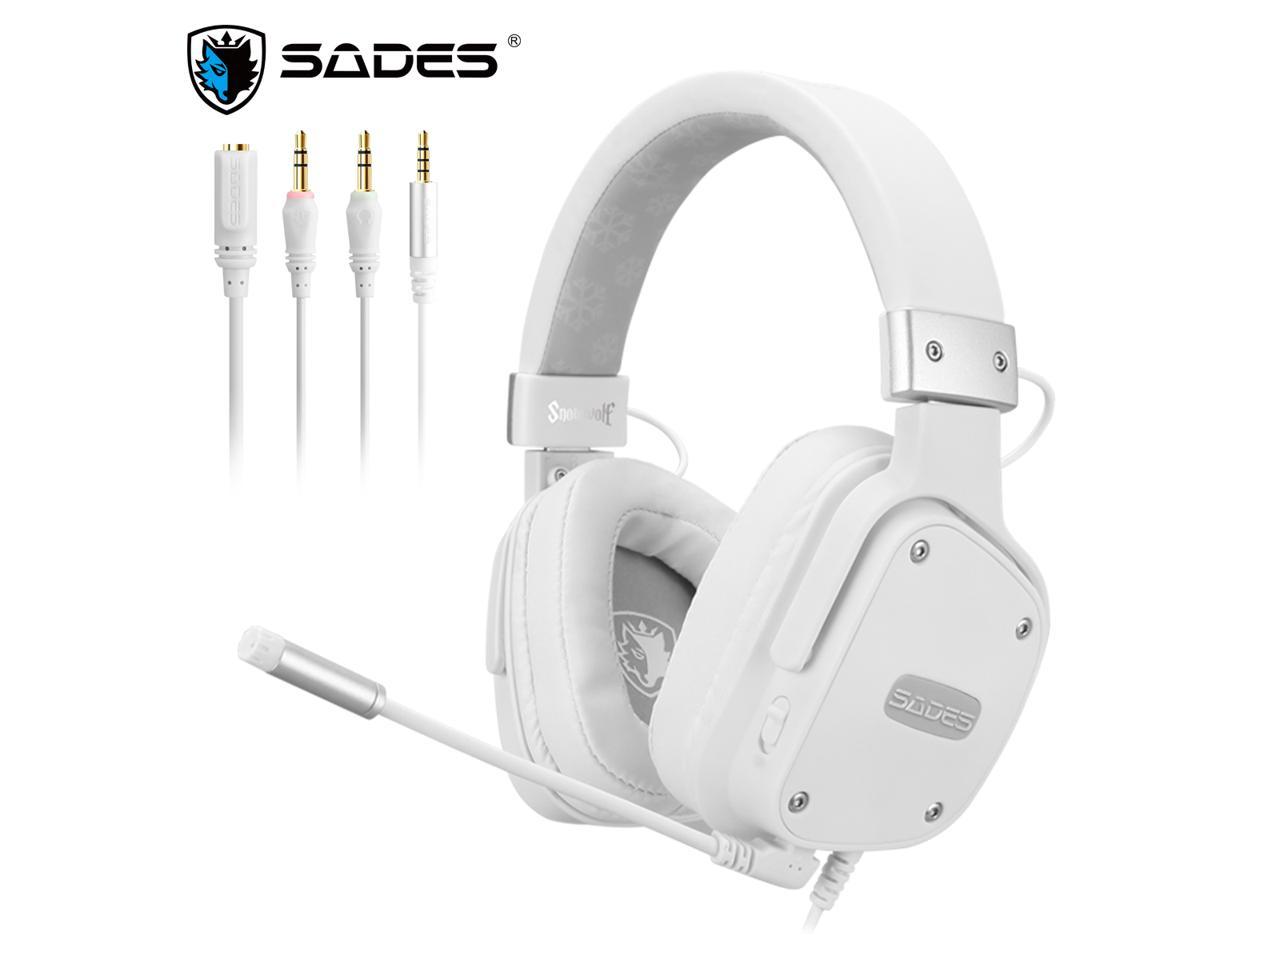 SADES Snowwolf Gaming Headset 3.5mm Connector Stero Sound Multi-Platform Headphones Detachable Microphone For PS4/Xbox One/Nintendo Switch/PC/laptop